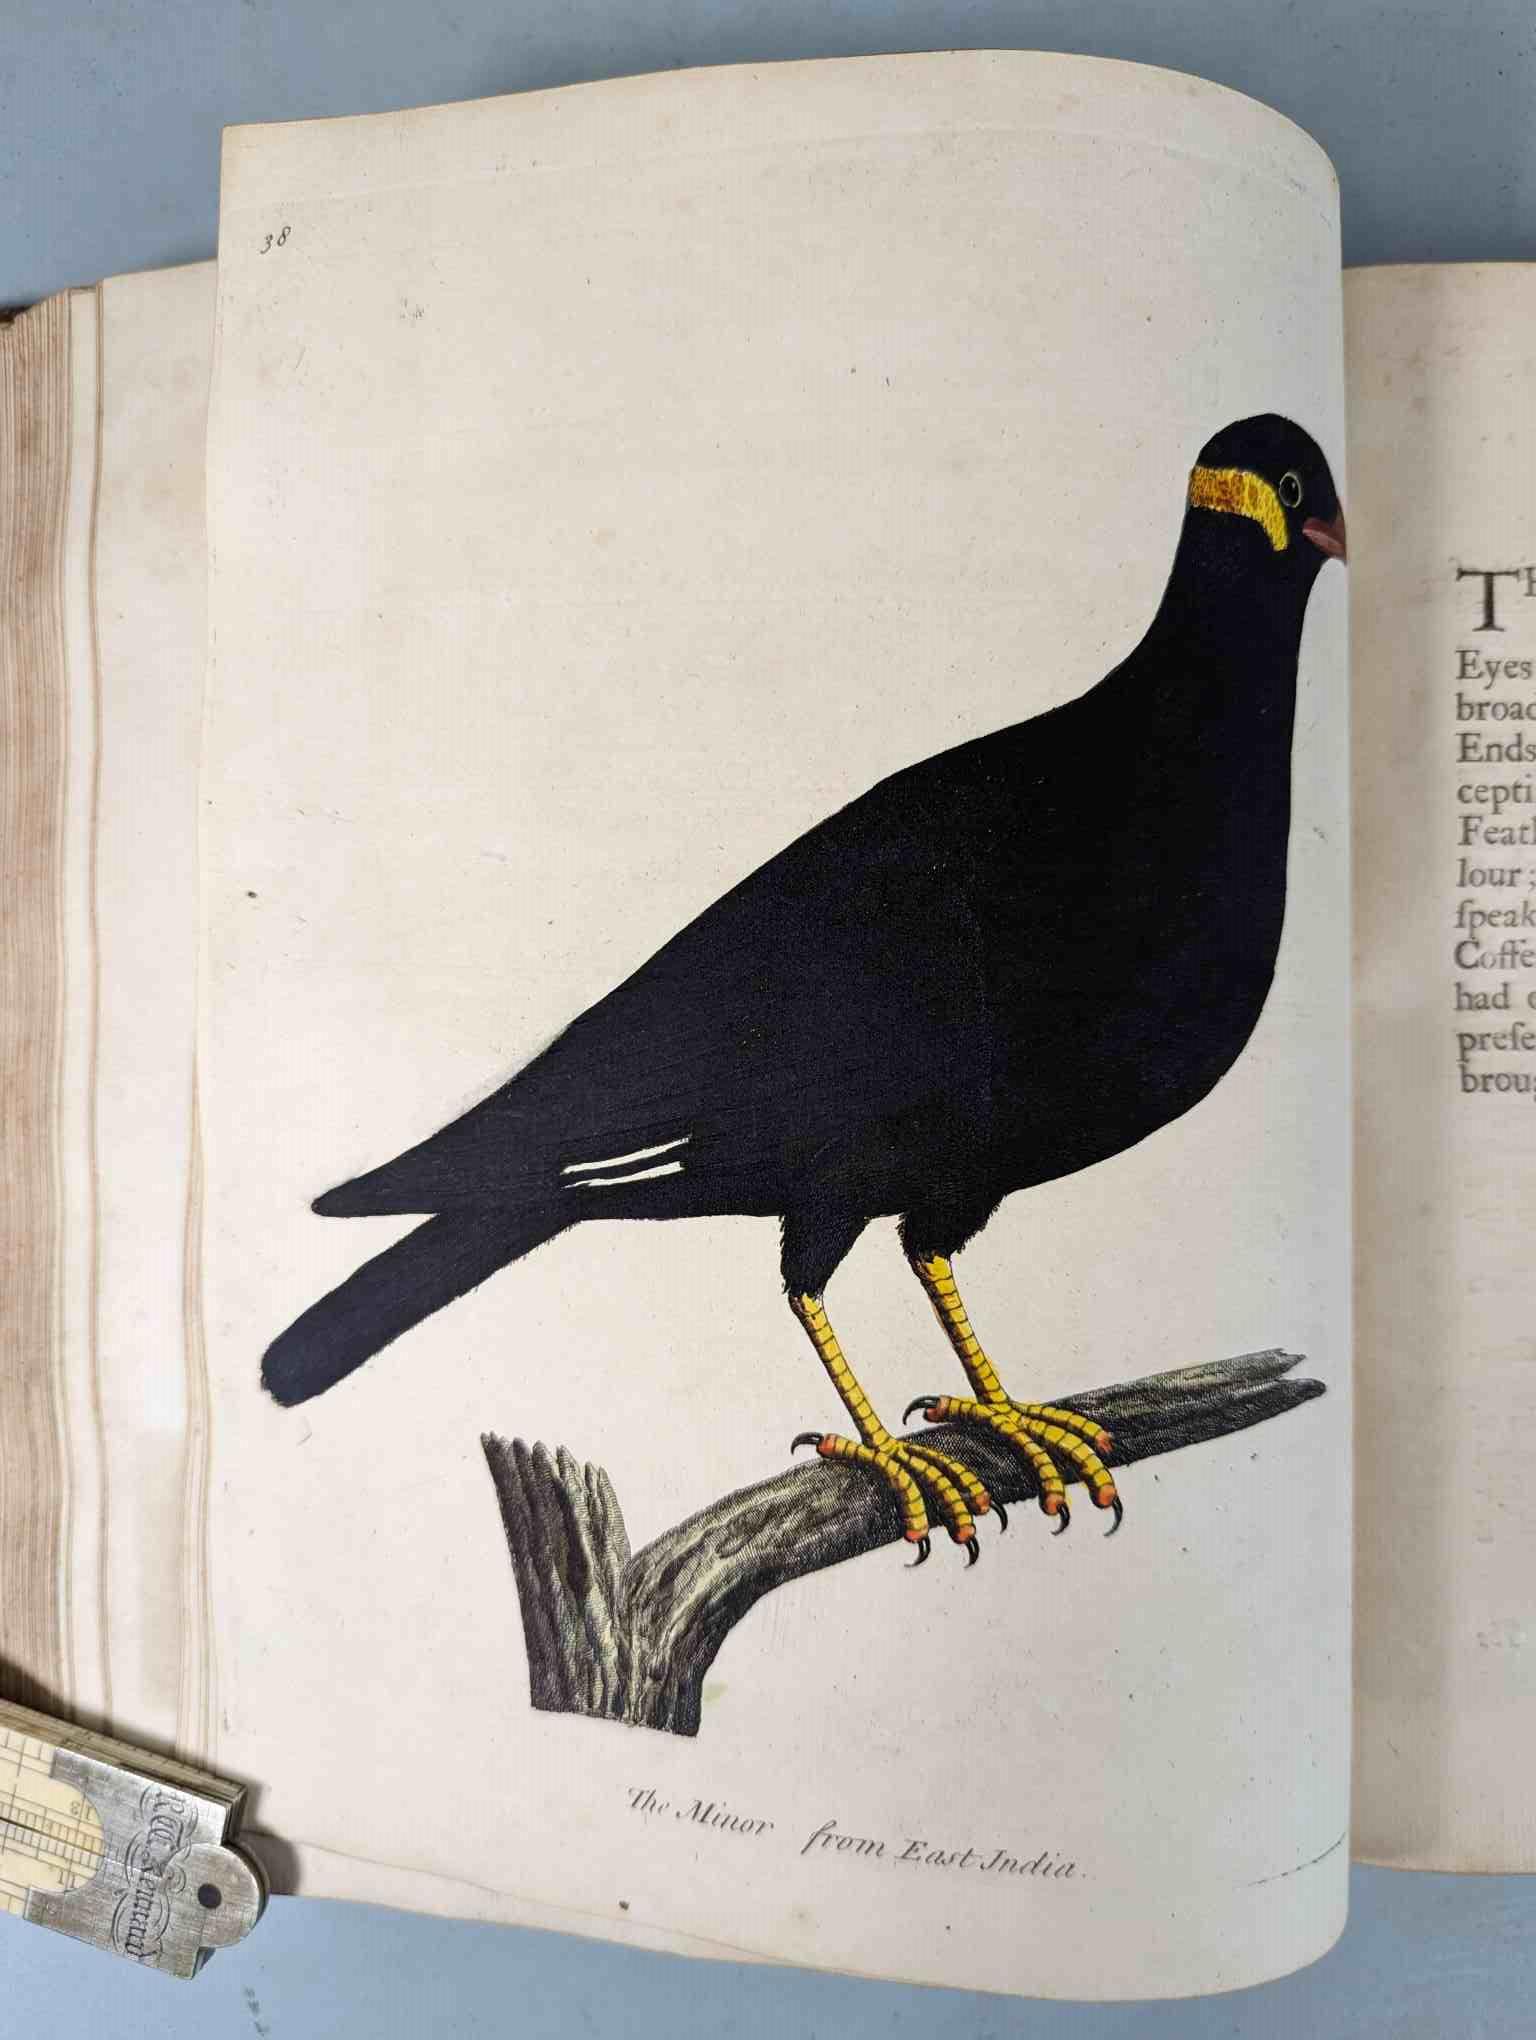 ALBIN, Eleazar. A Natural History of Birds, to which are added, Notes and Observations by W. - Image 142 of 208